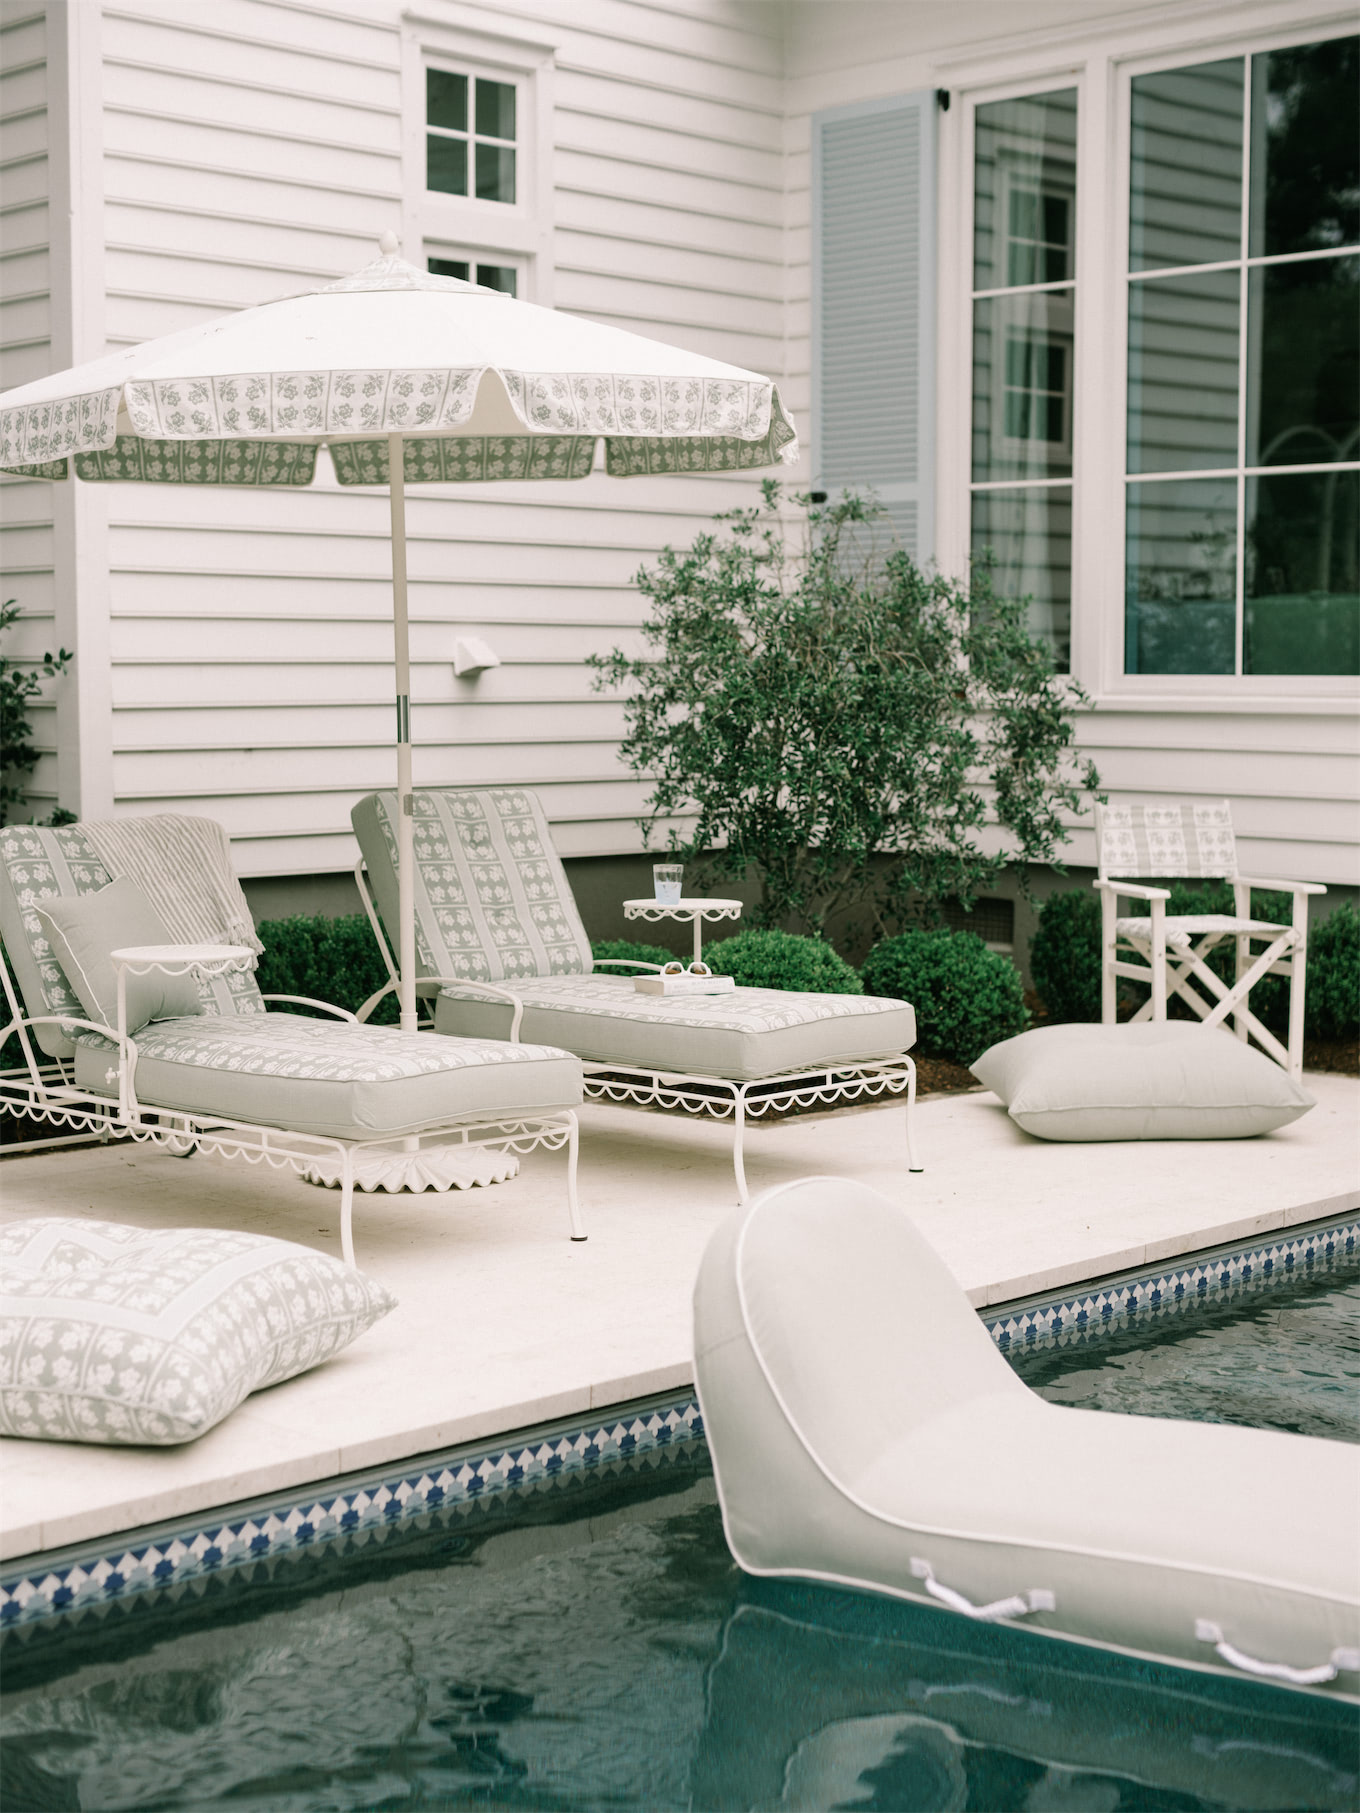 green white outdoor pool furniture and accessories